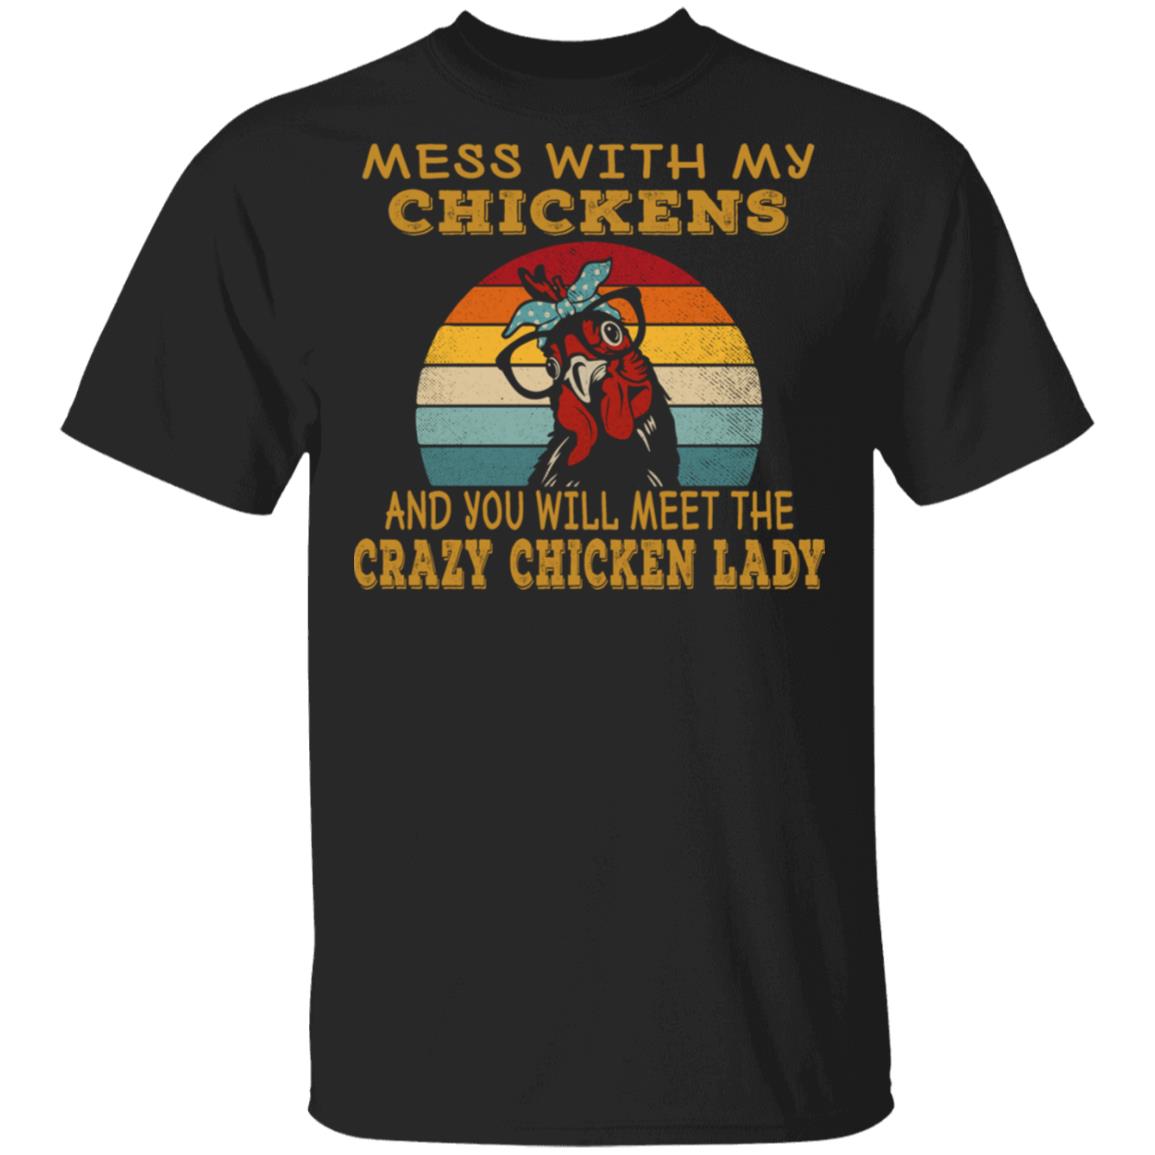 Mess With My Chickens And You Will Meet The Crazy Chicken Lady T-Shirt Vintage Shirt